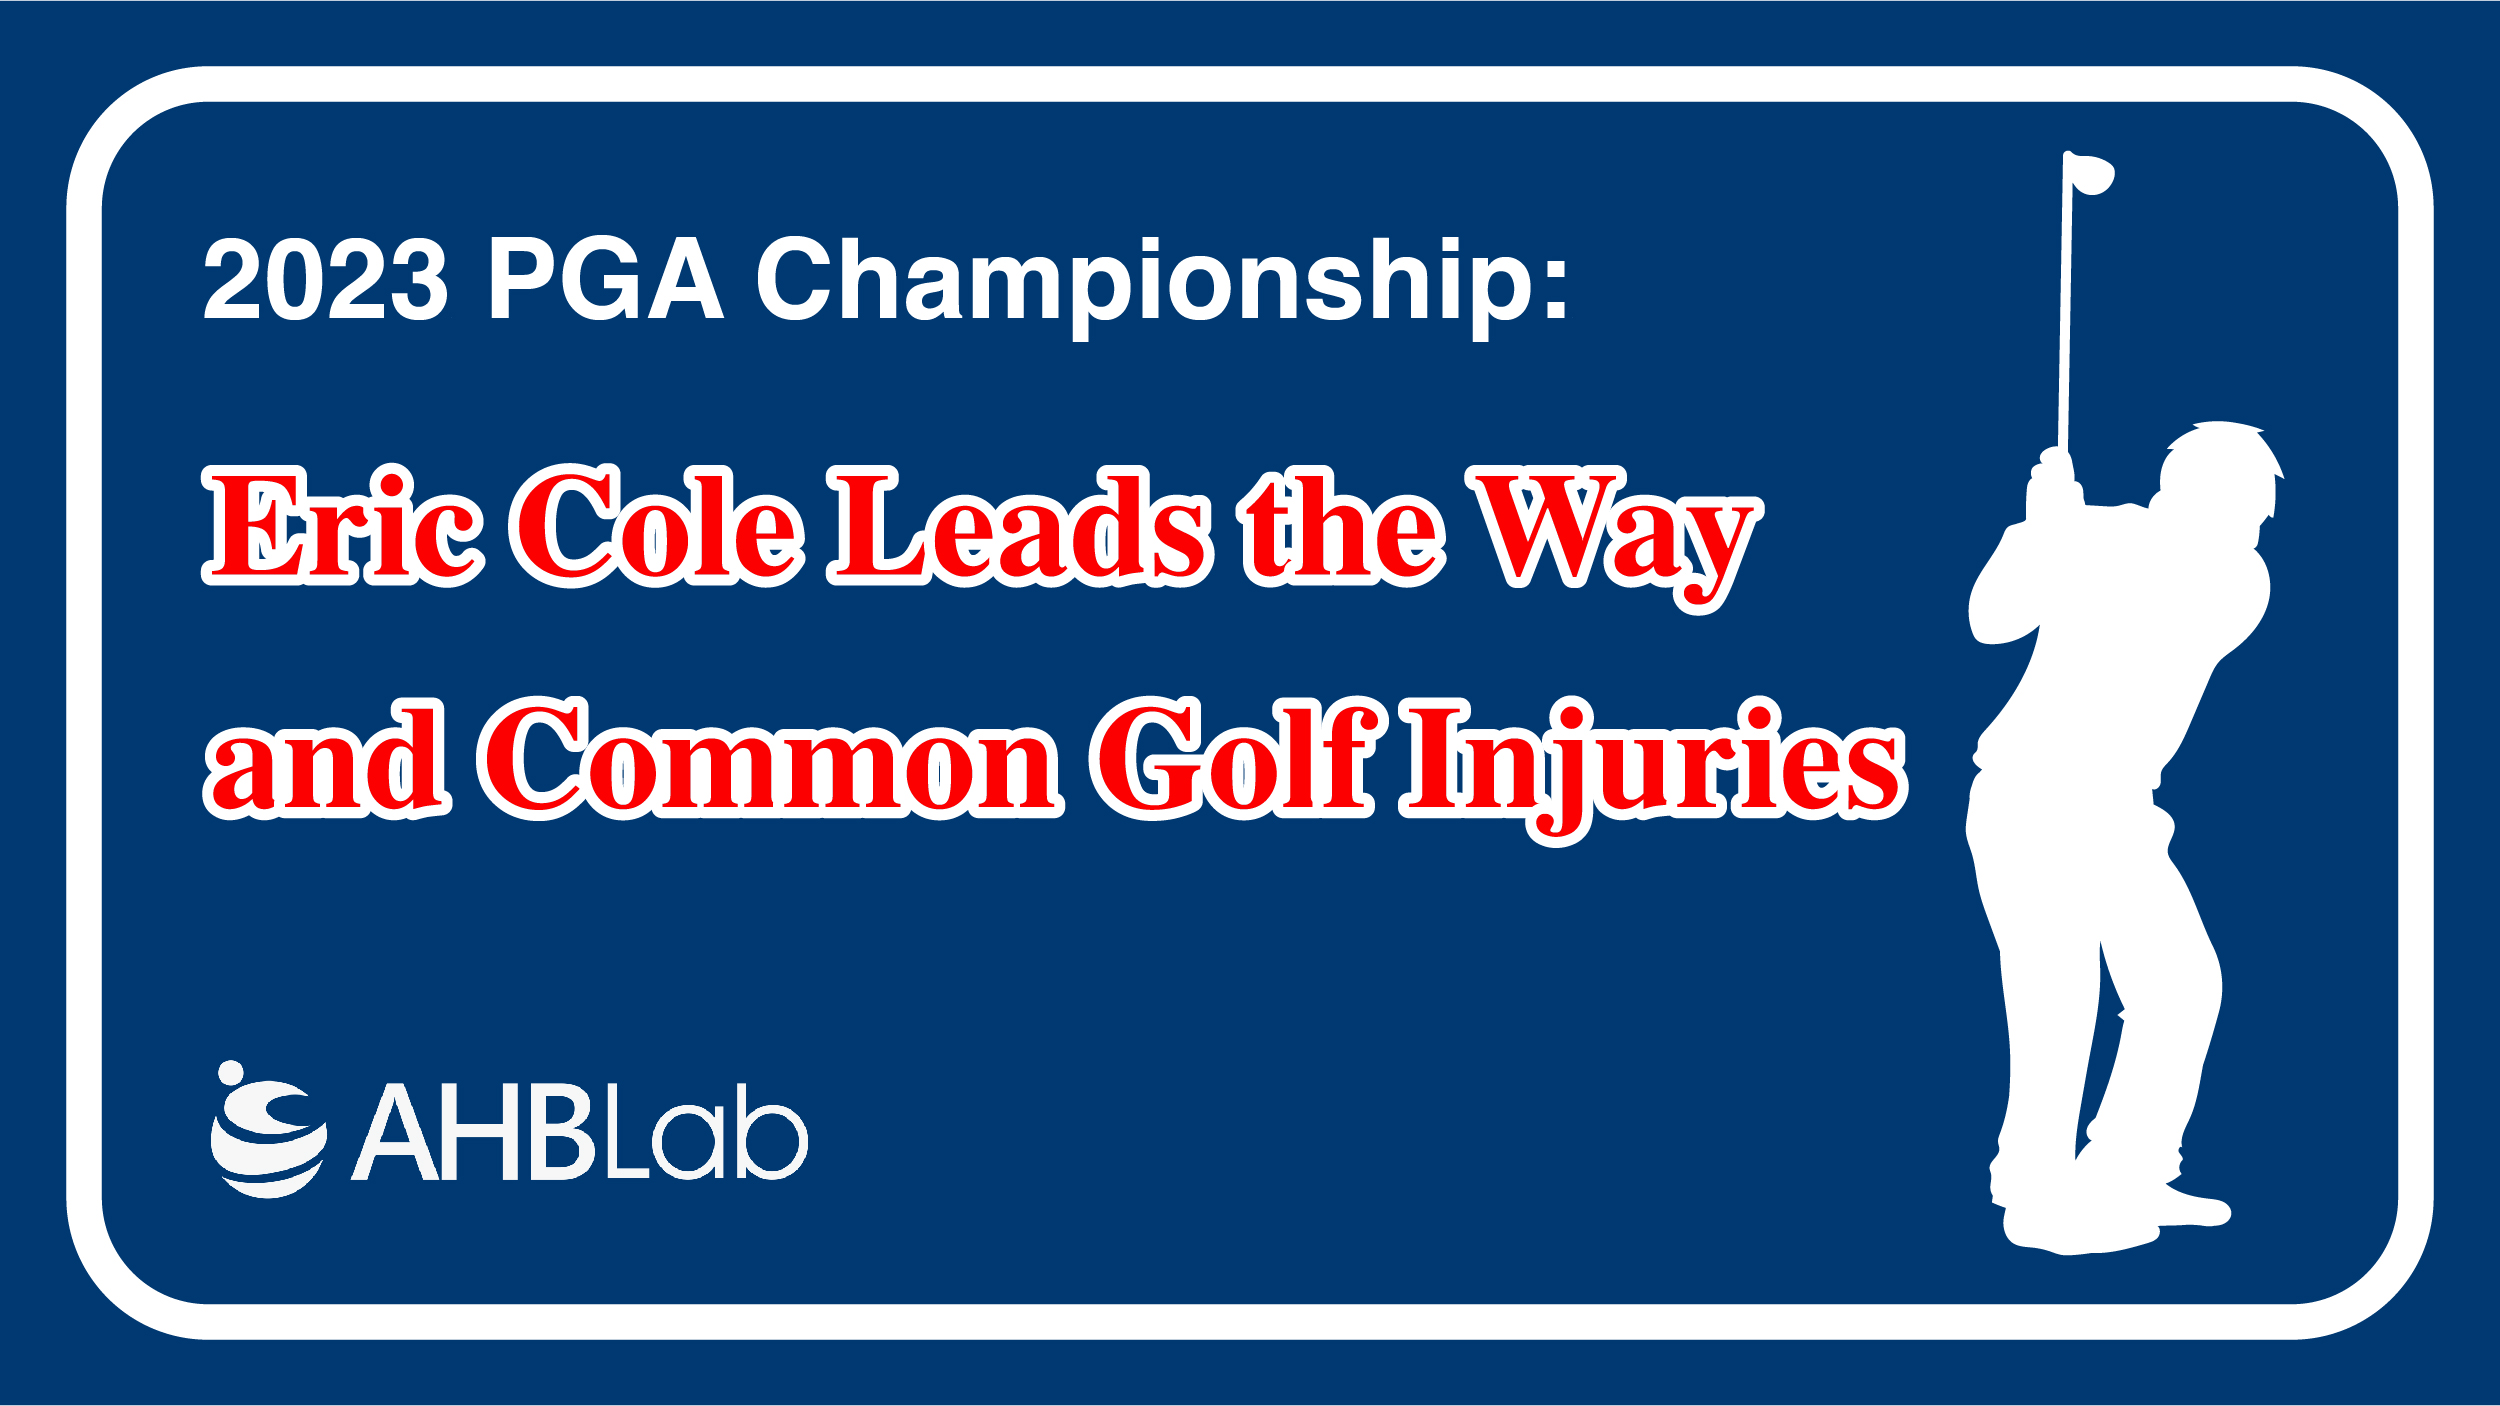 Eric Cole Leads the Way and Common Golf Injuries